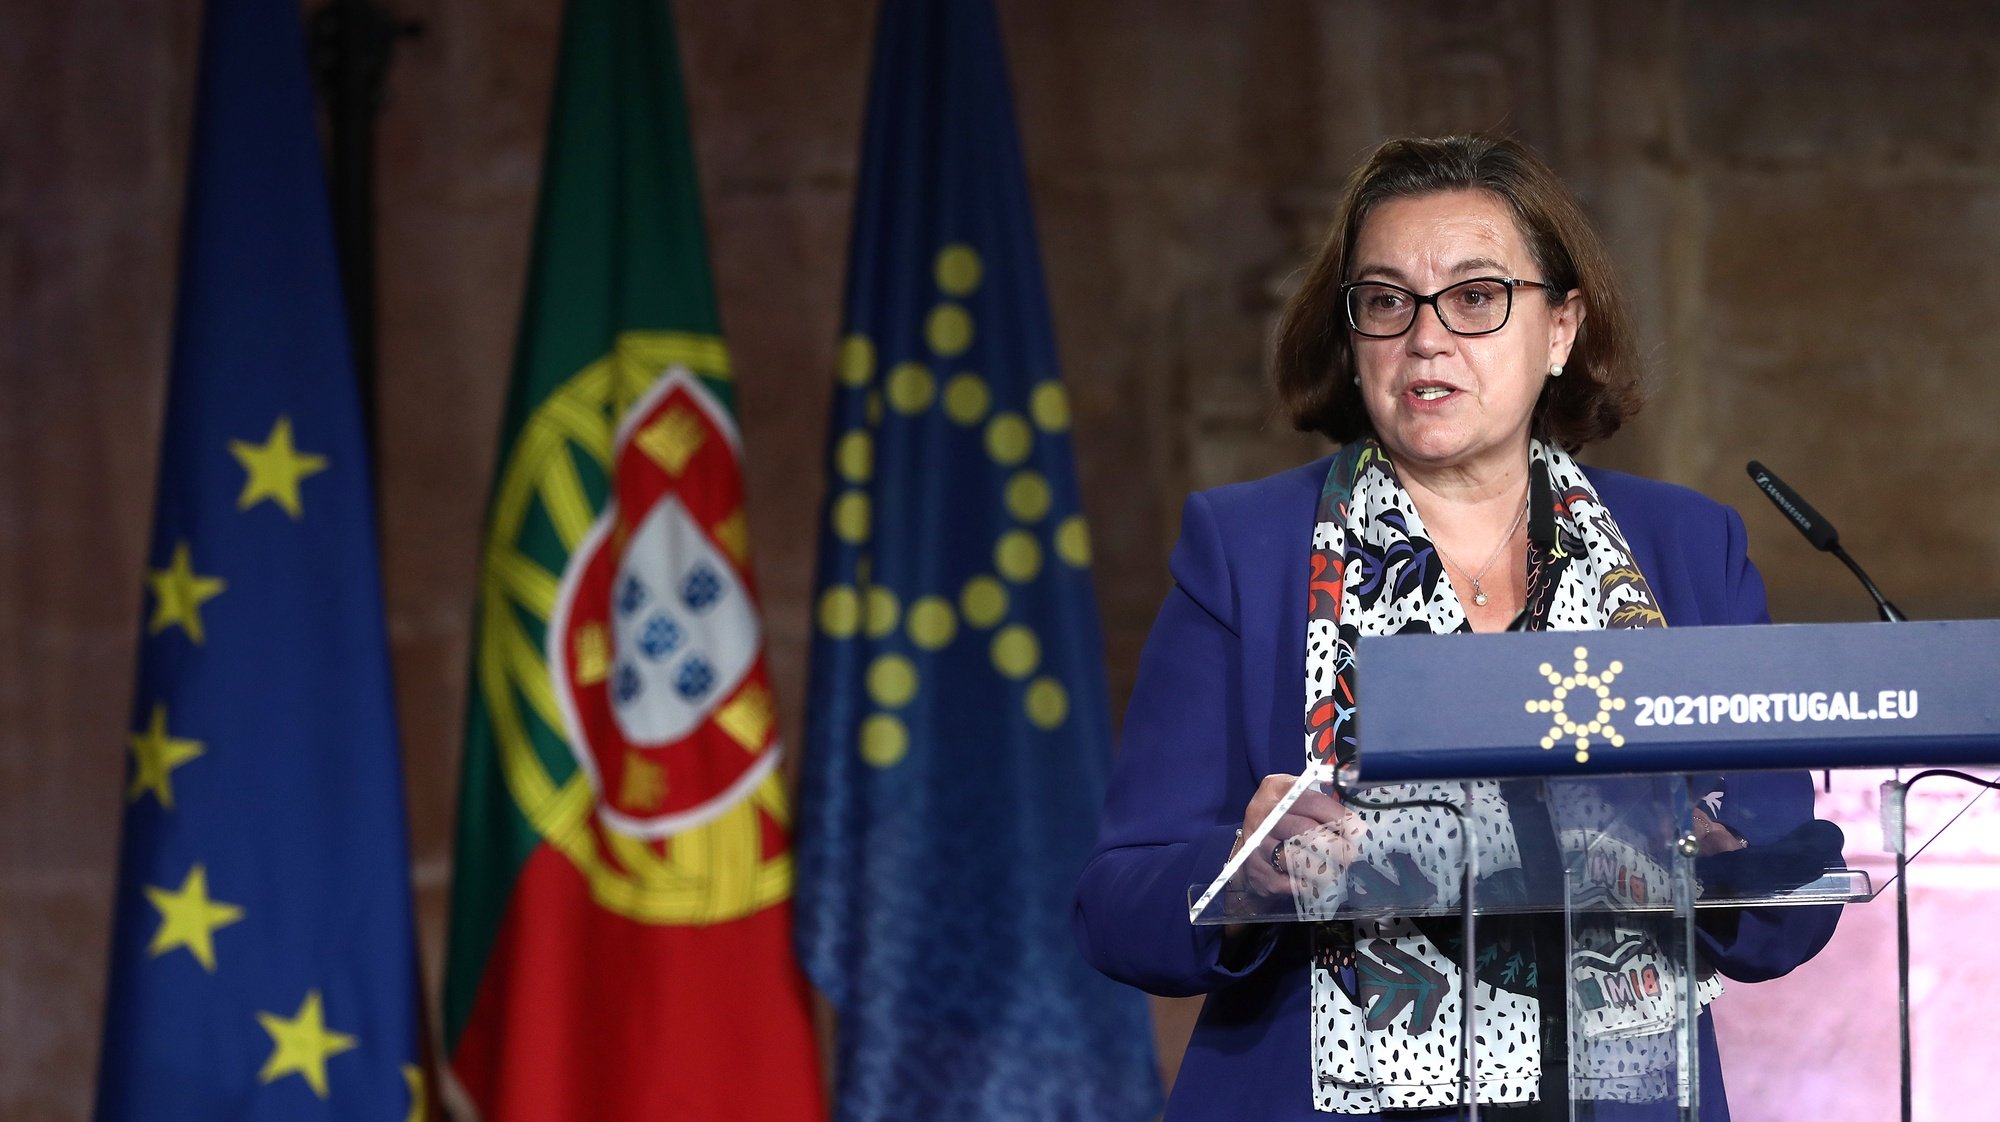 epa09278988 Portuguese Secretary of State for European Affairs Ana Paula Zacarias attends a Conference on the Launch of Creative Europe under the Portuguese Presidency of the Council of the European Union in Lisbon, Portugal, 17 June 2021. The high-level conference will feature speakers from all over Europe â€“ cultural agents, thinkers, politicians, and governmental decision-makers â€“ with the aim of getting Europe behind the new Creative Europe Program.  EPA/ANTONIO PEDRO SANTOS